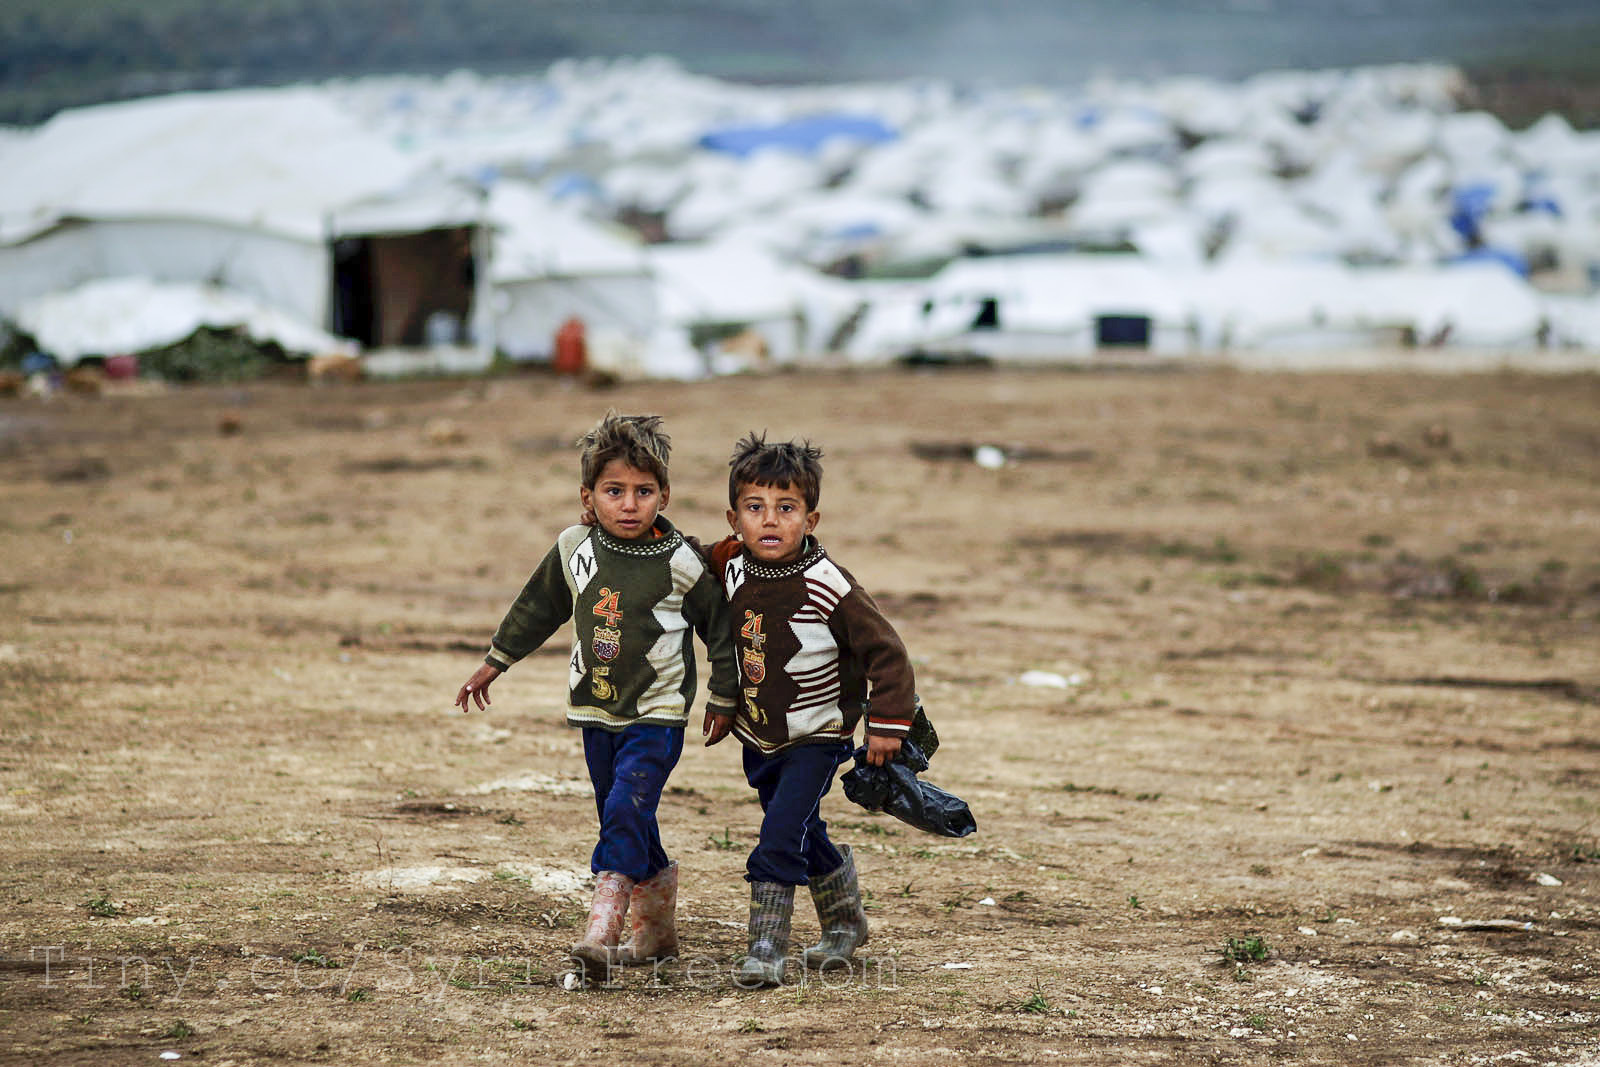 Why Should the U.S. Accept Syrian Refugees? Because It Helped Displace Them.